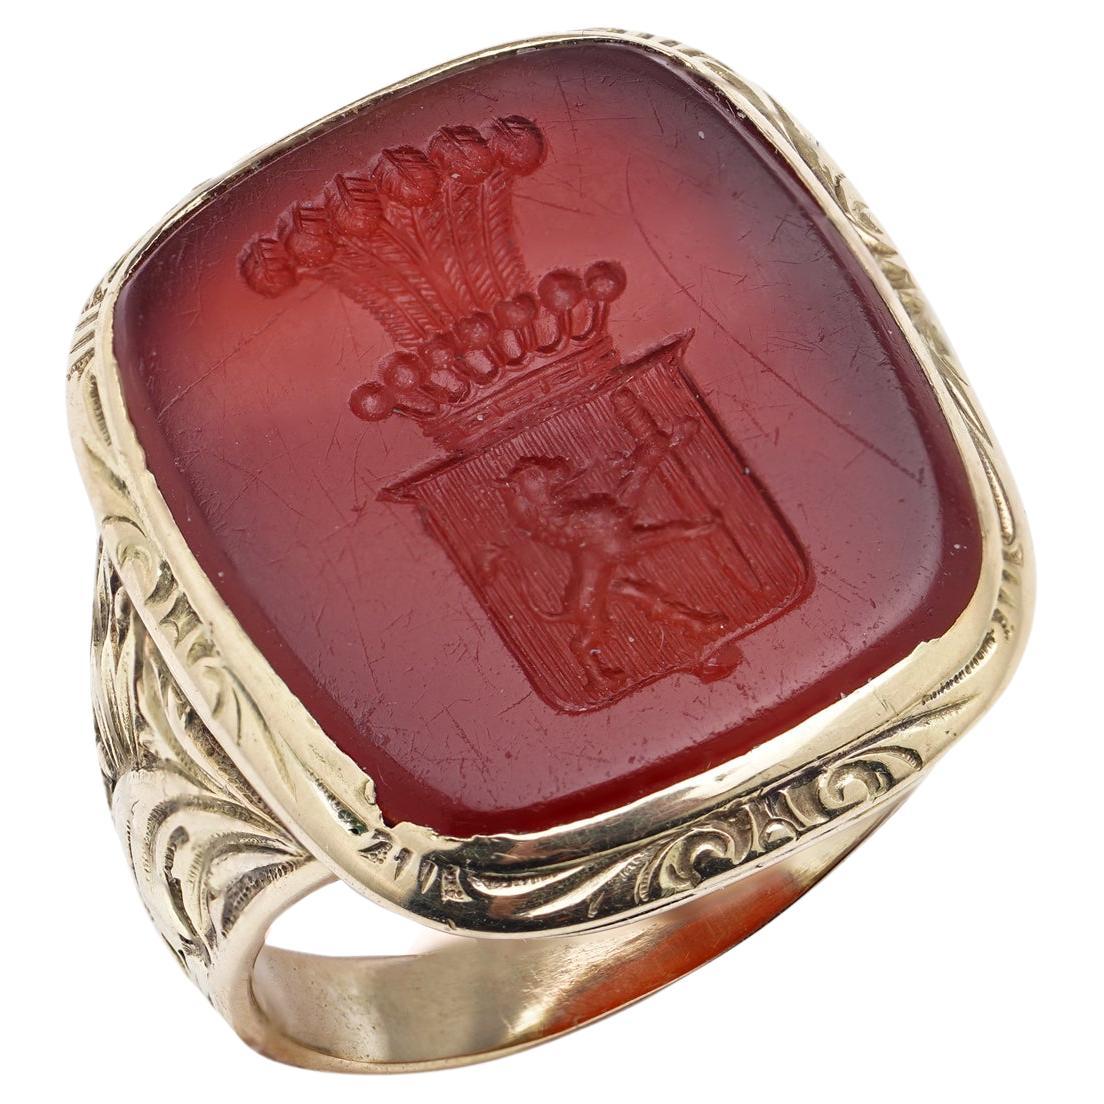 Antique Signet Ring with Rampant Lion Holding a Sword